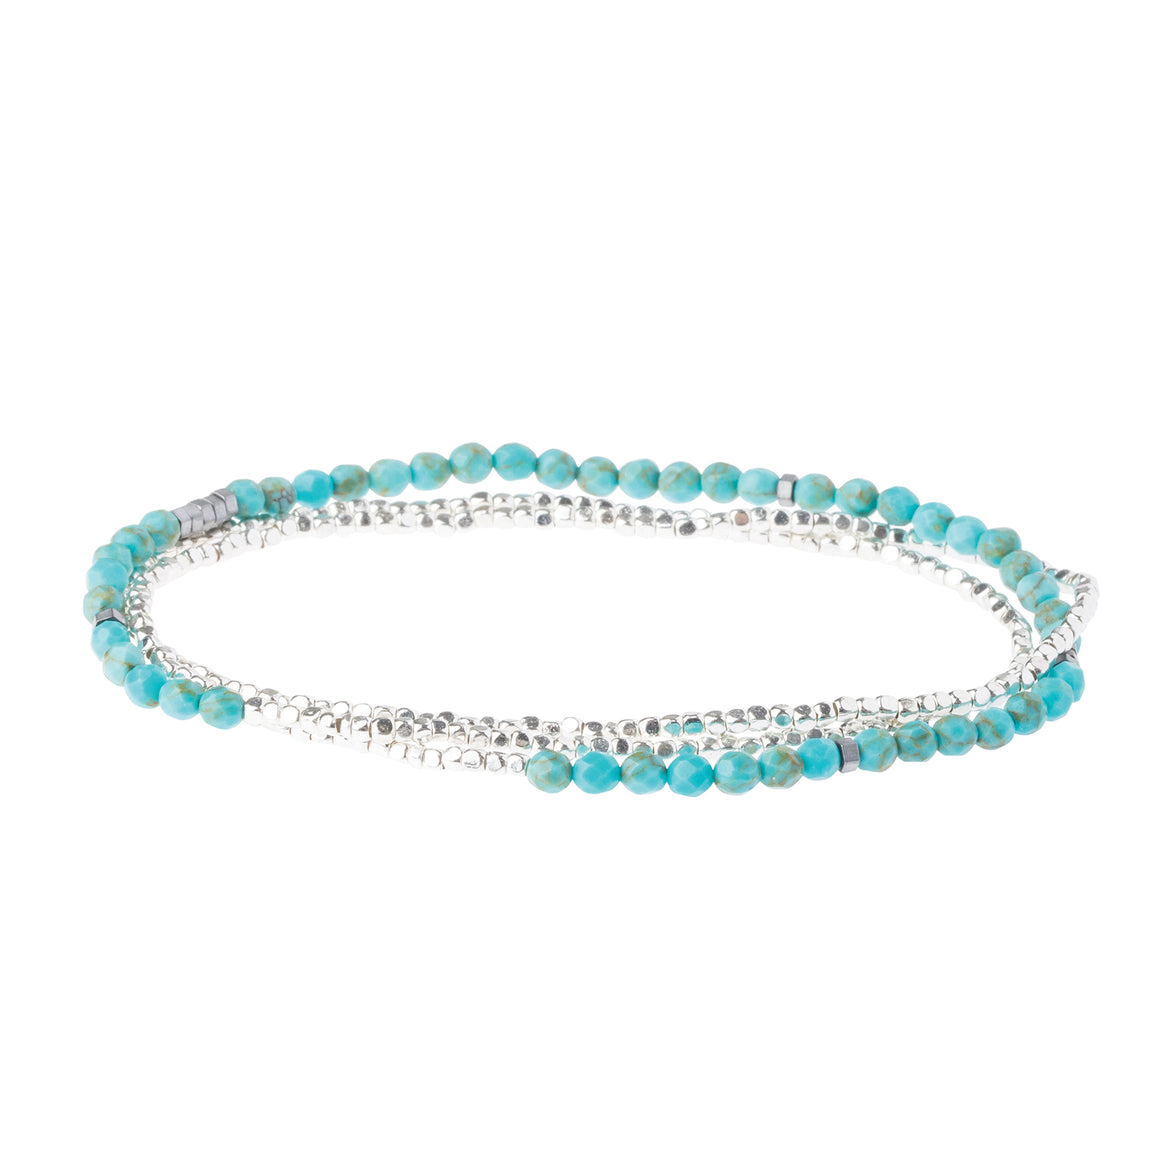 Turquoise - Stone Of The Sky Bracelet or Necklace, Gold — Lost